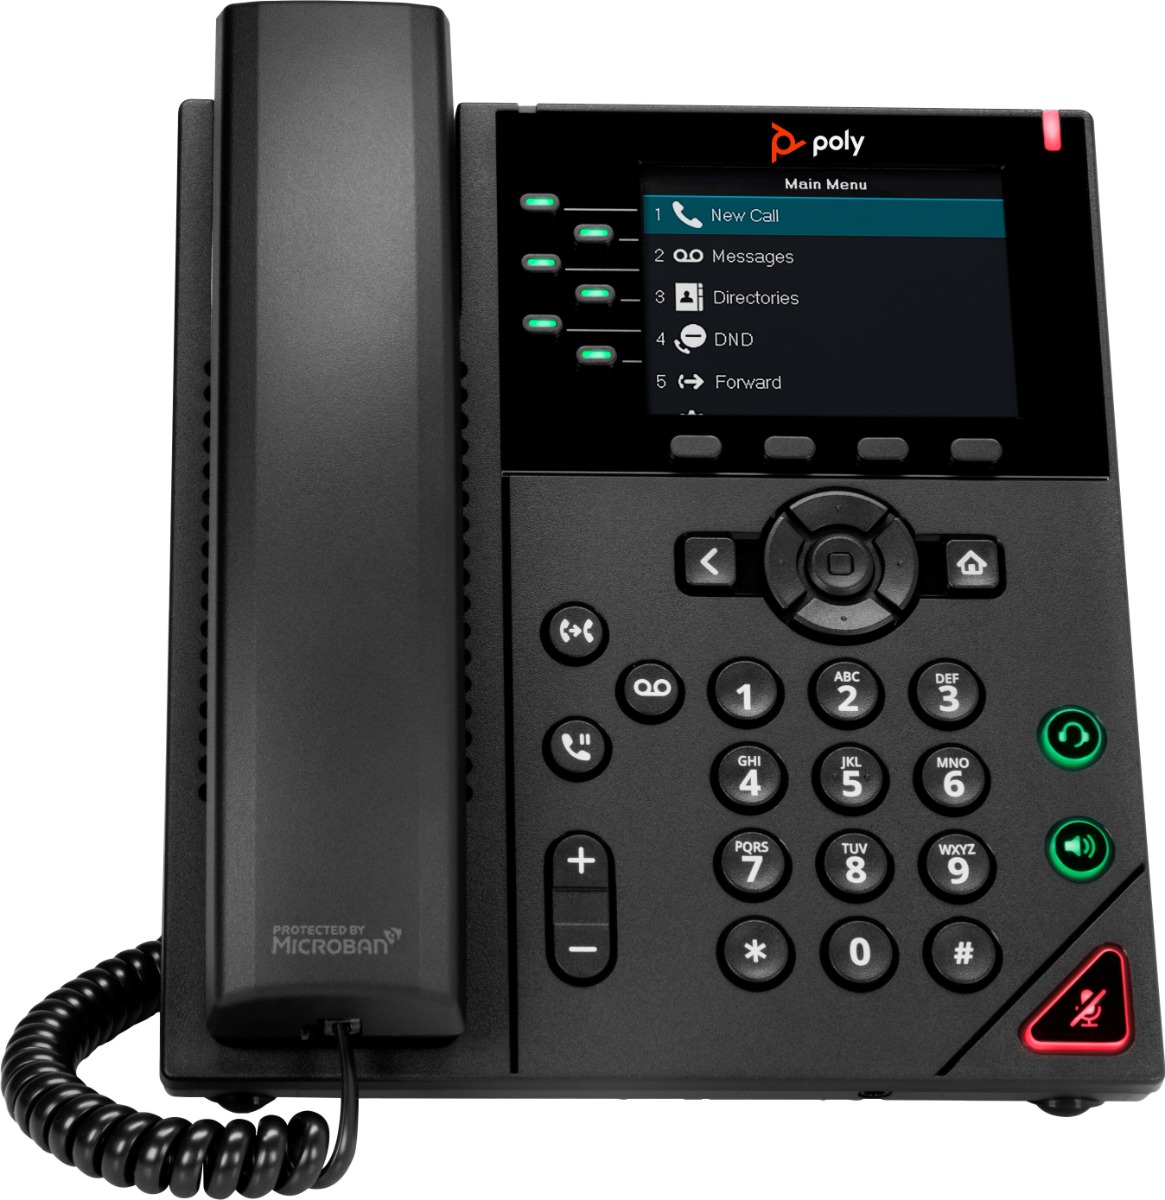 Is the model of the Polycom IP desktop phone the vvx 350?